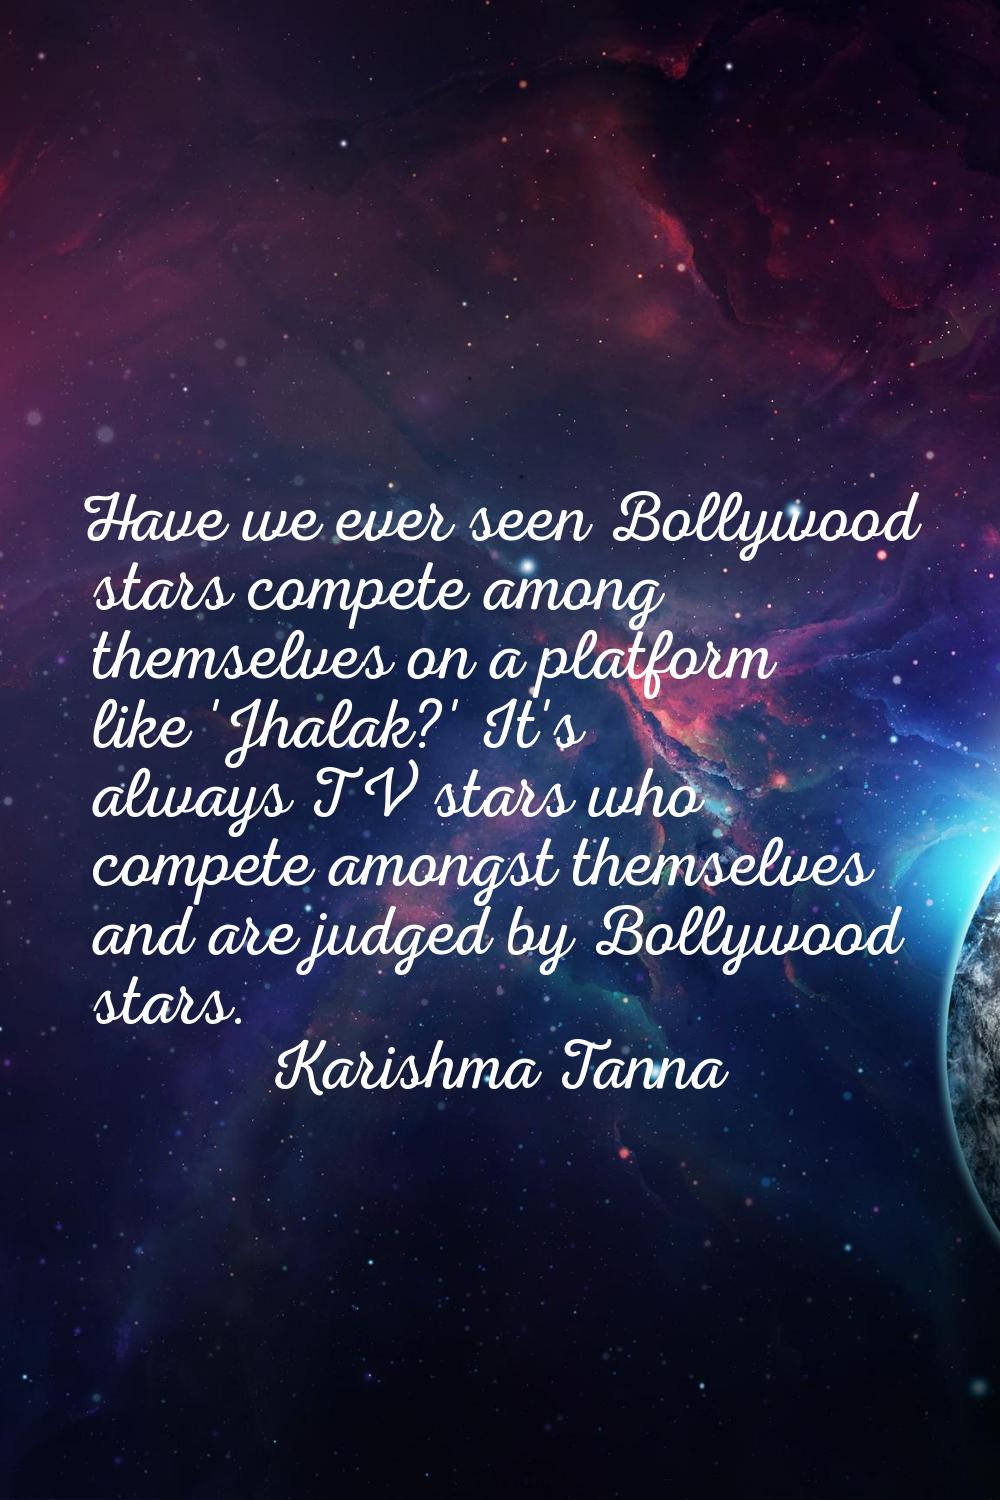 Have we ever seen Bollywood stars compete among themselves on a platform like 'Jhalak?' It's always